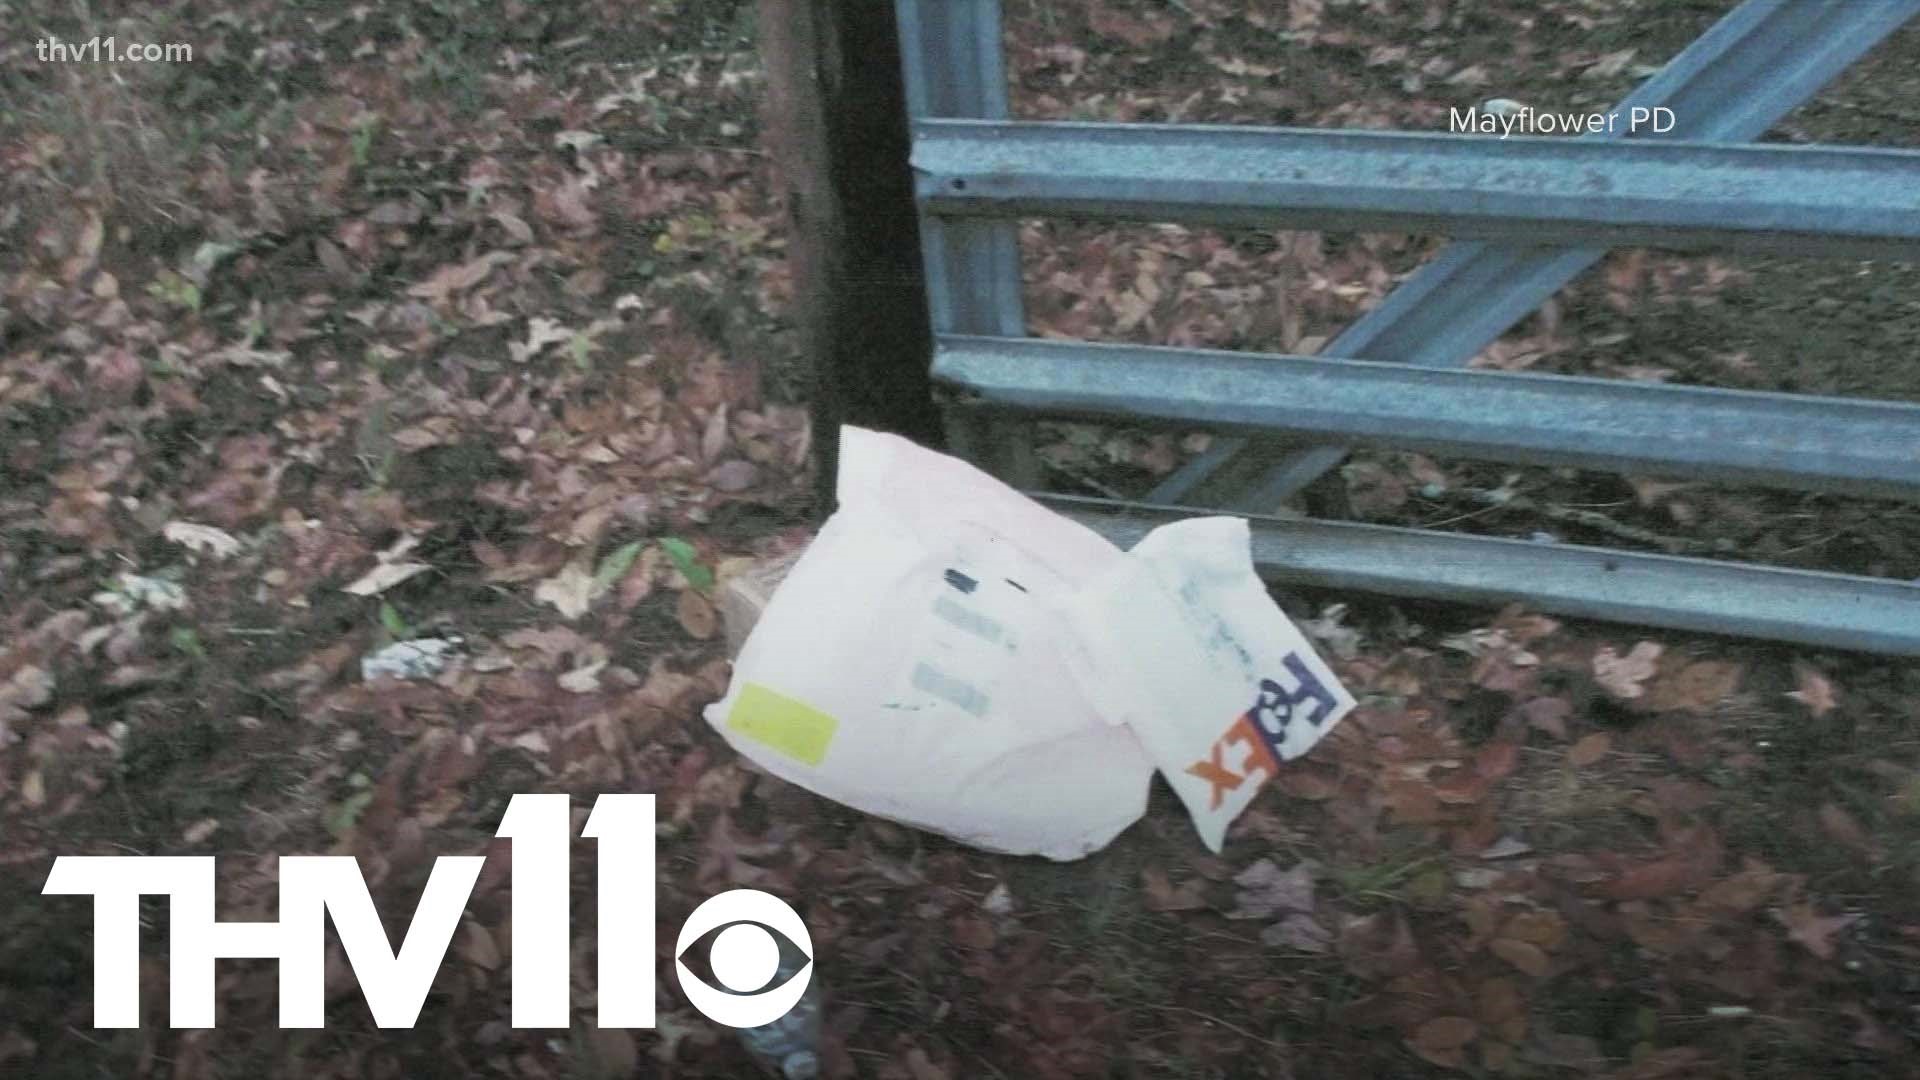 A FedEx worker is facing theft charges after allegedly dumping people's packages in Mayflower.